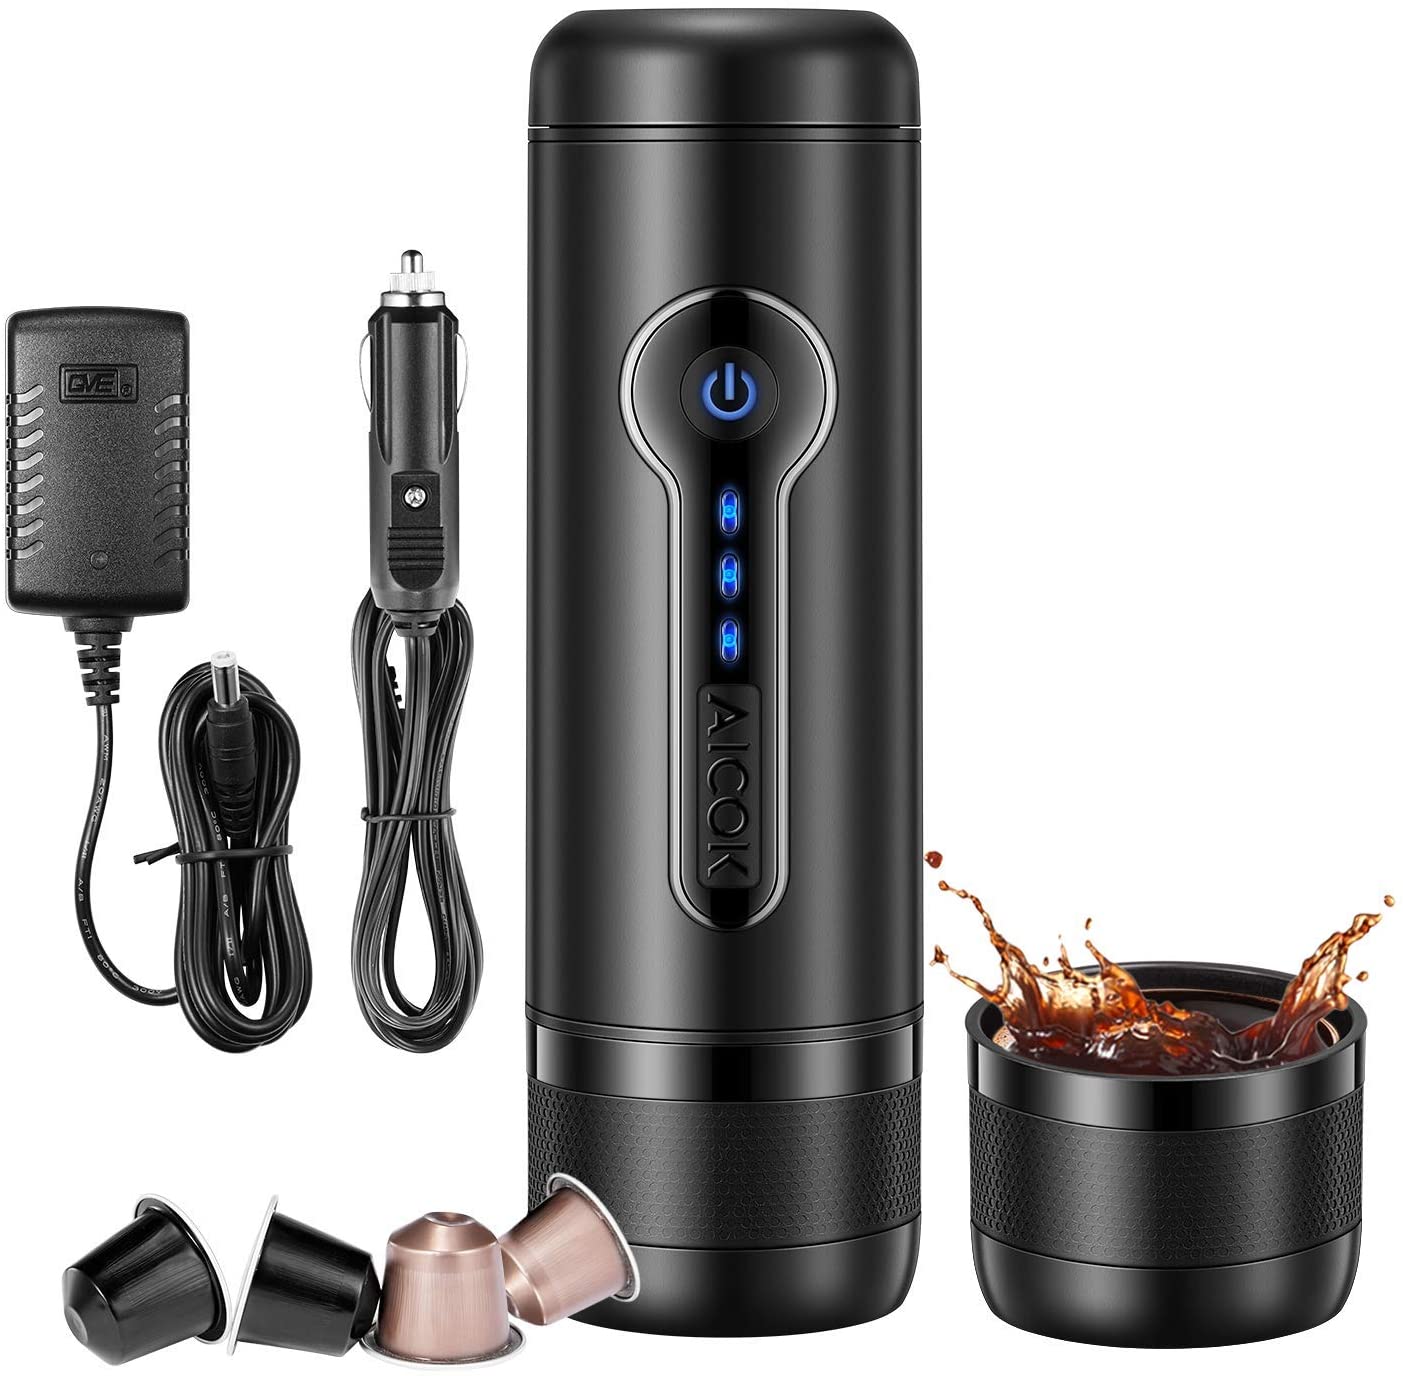 NEW IN🔥Oceanrich Travel Friendly Electric Cordless Coffee Maker